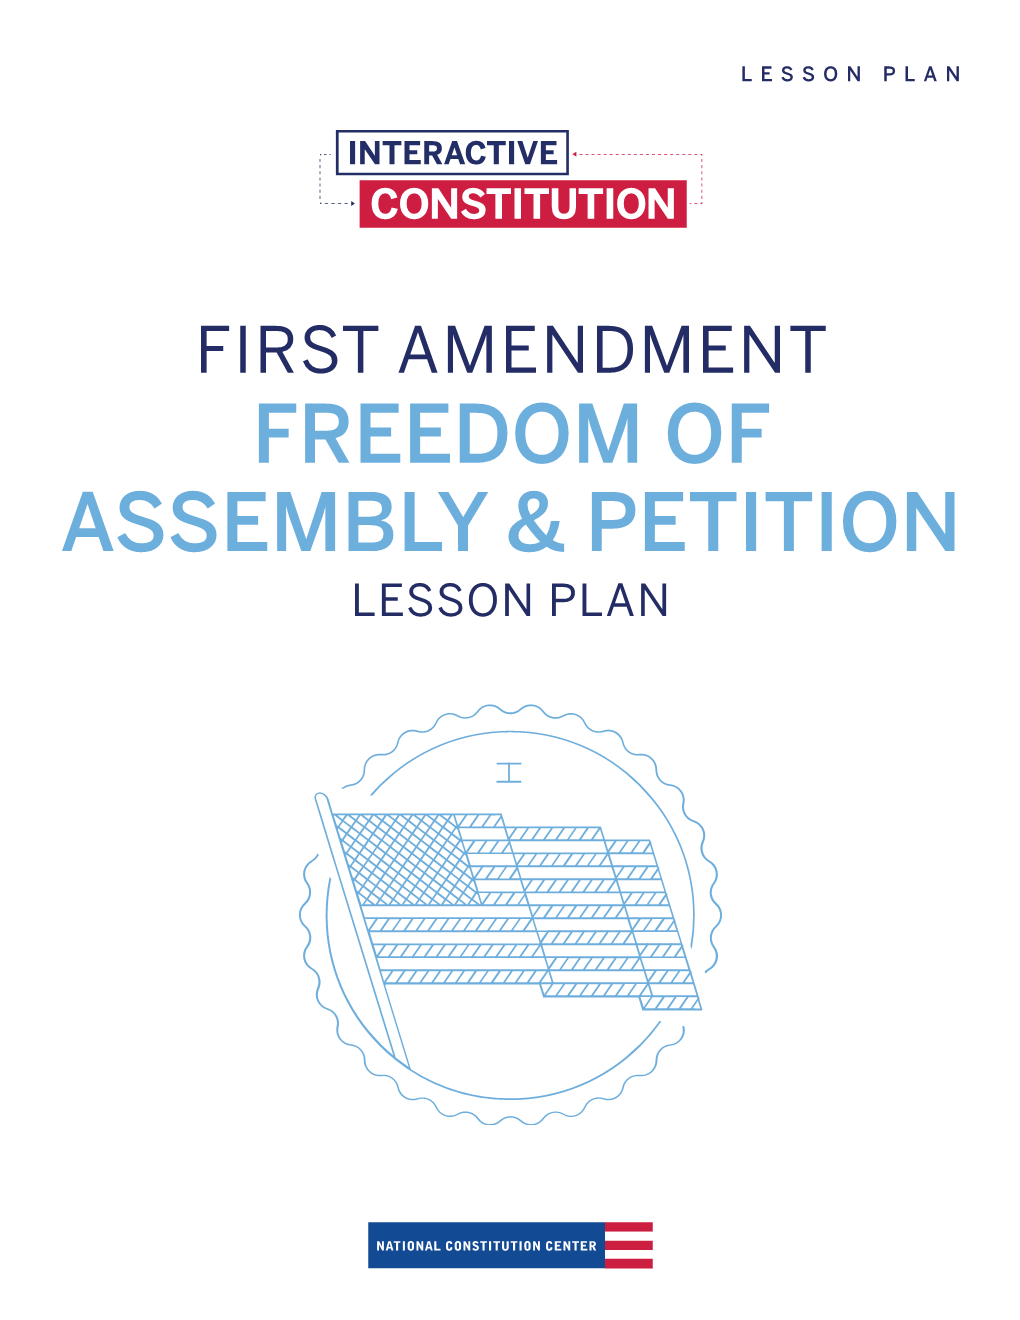 Freedom of Assembly & Petition